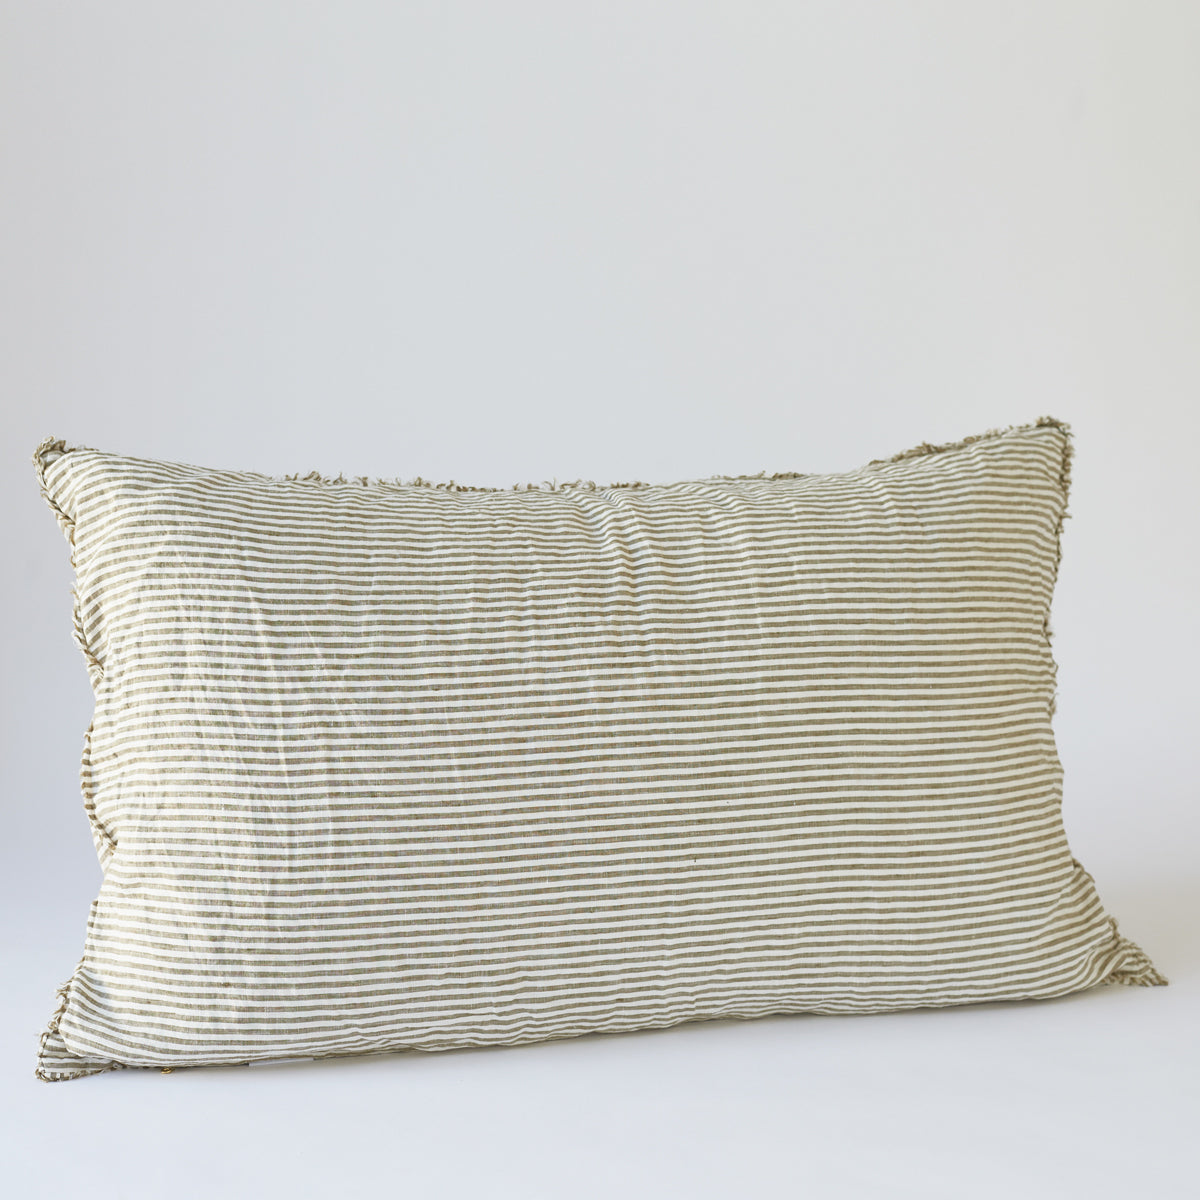 Bedhead Cushion in Olive Stripe - Cover Only